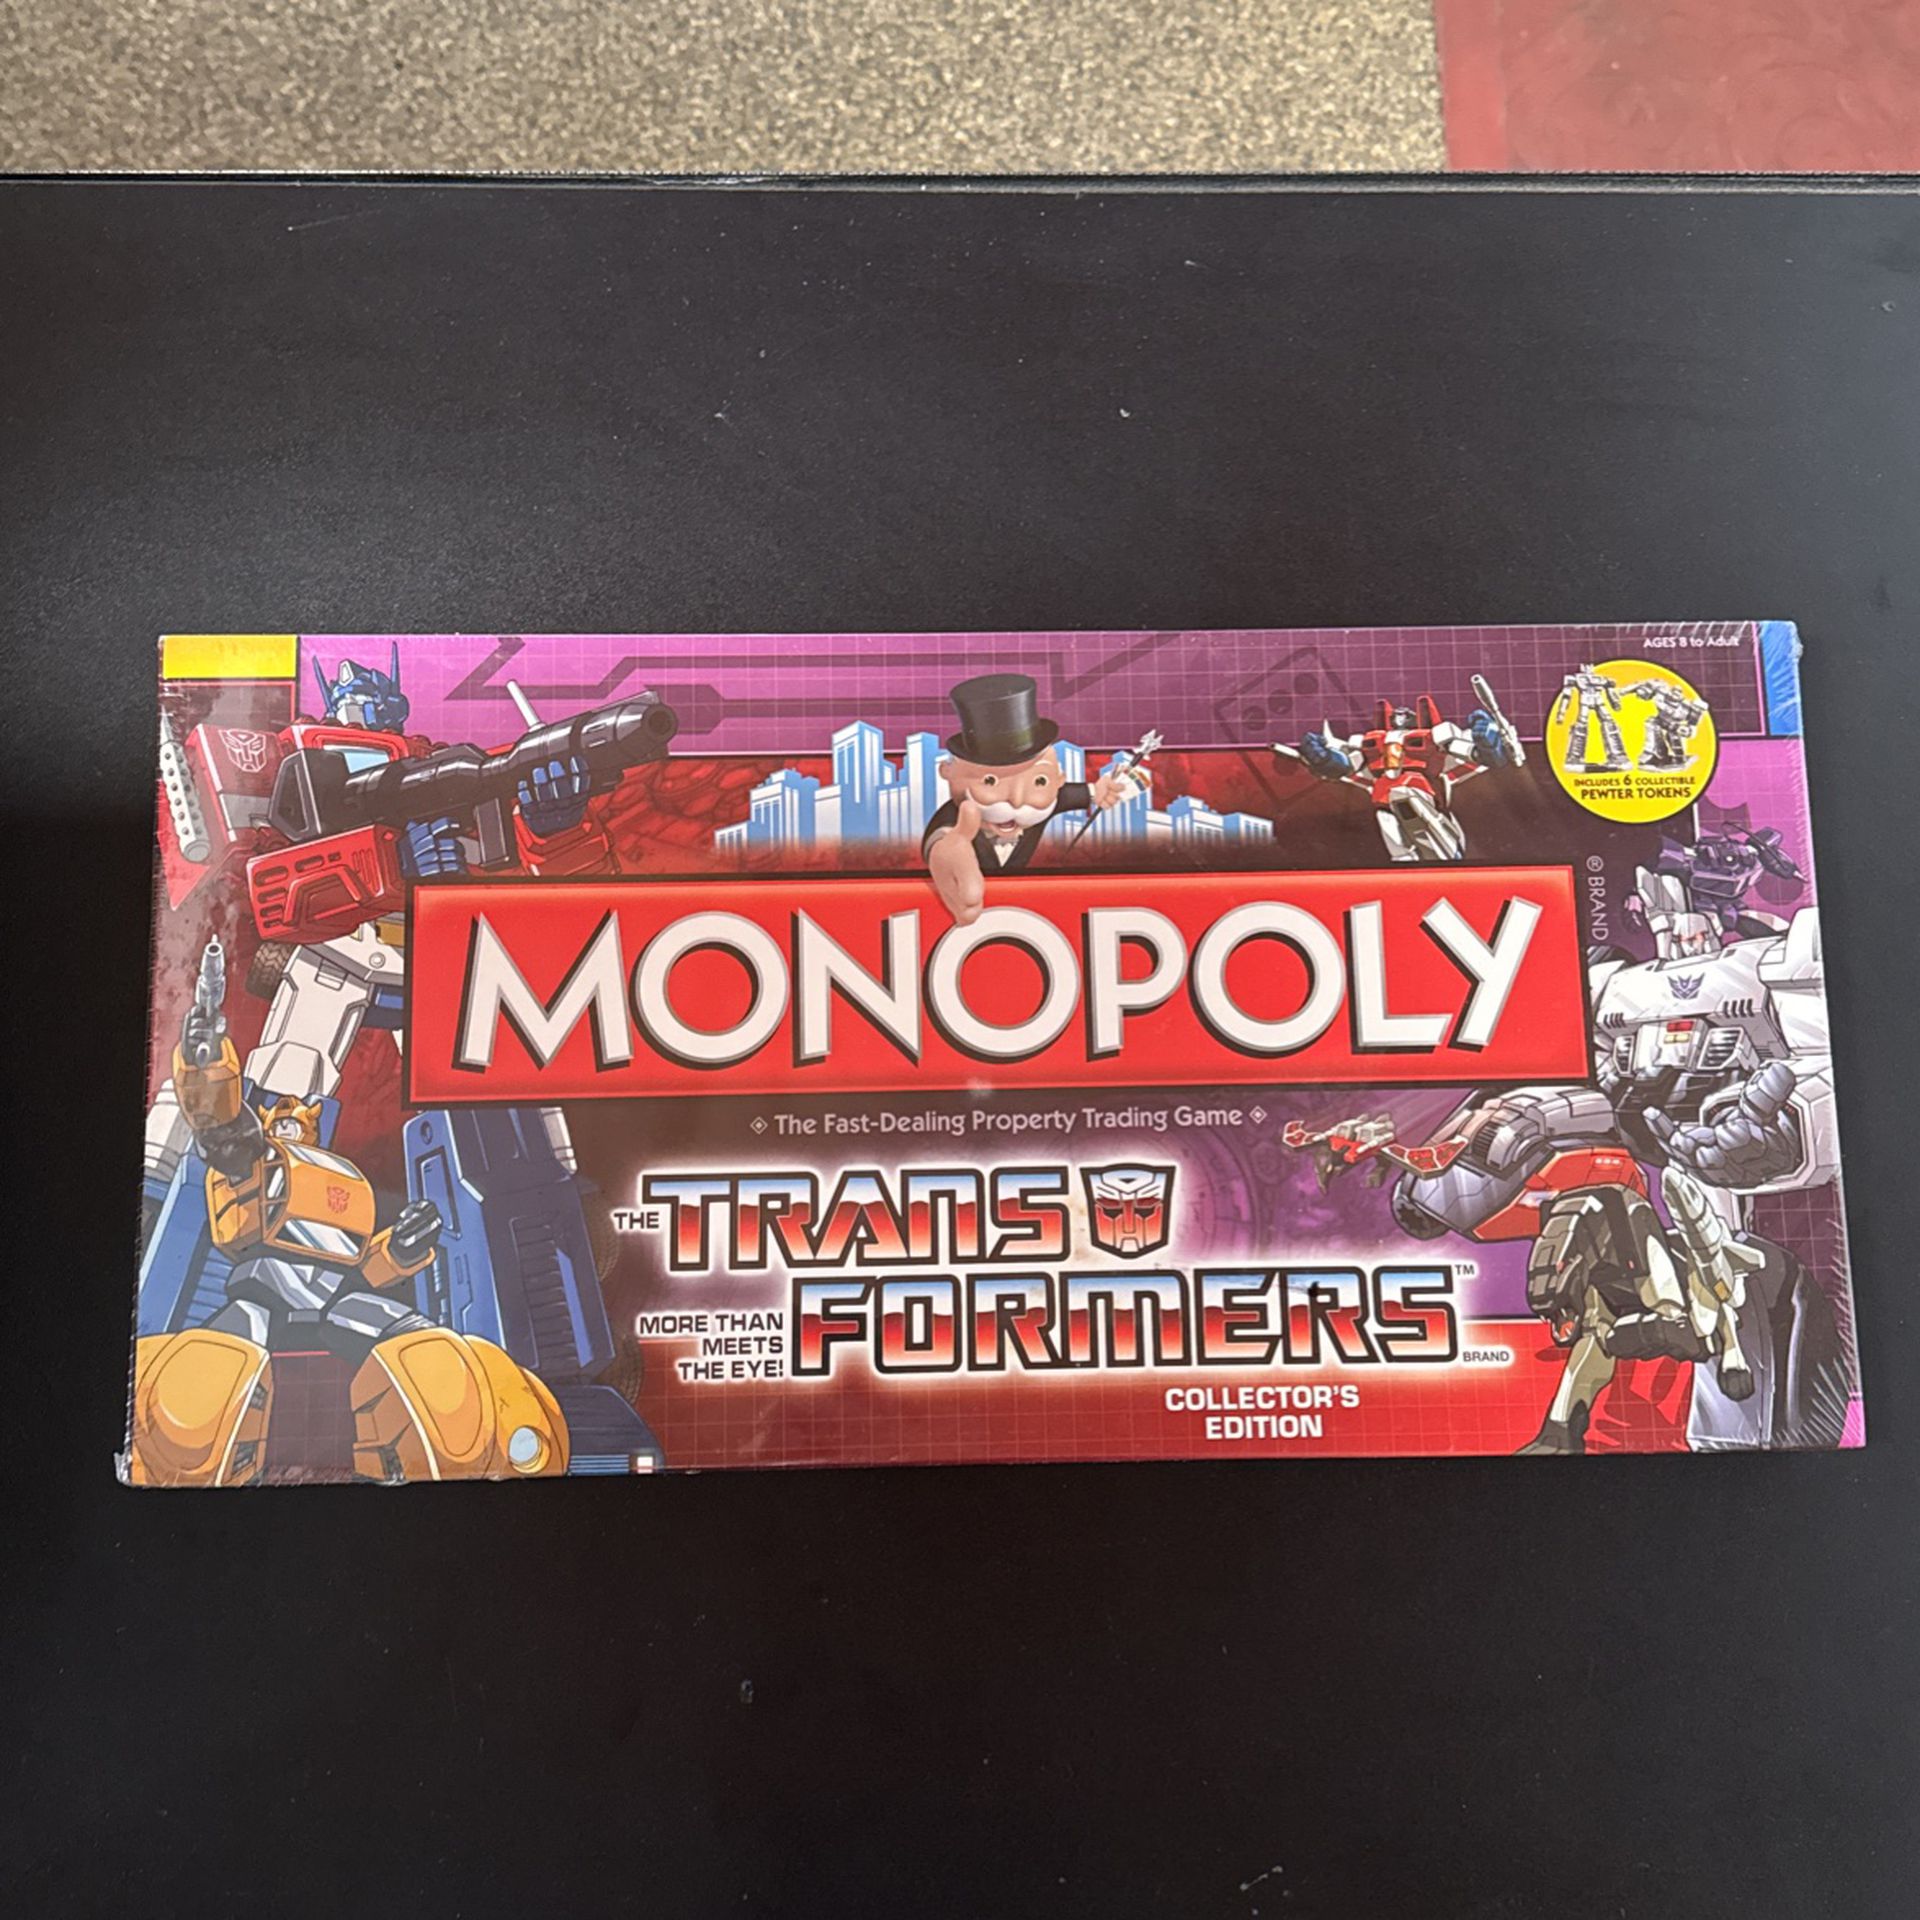 NEW Monopoly The TRANSFORMERS Collector's Edition 2009 Game   Factory Sealed - NISB - Hasbro 2009 - Includes Optional Transformers Game Play